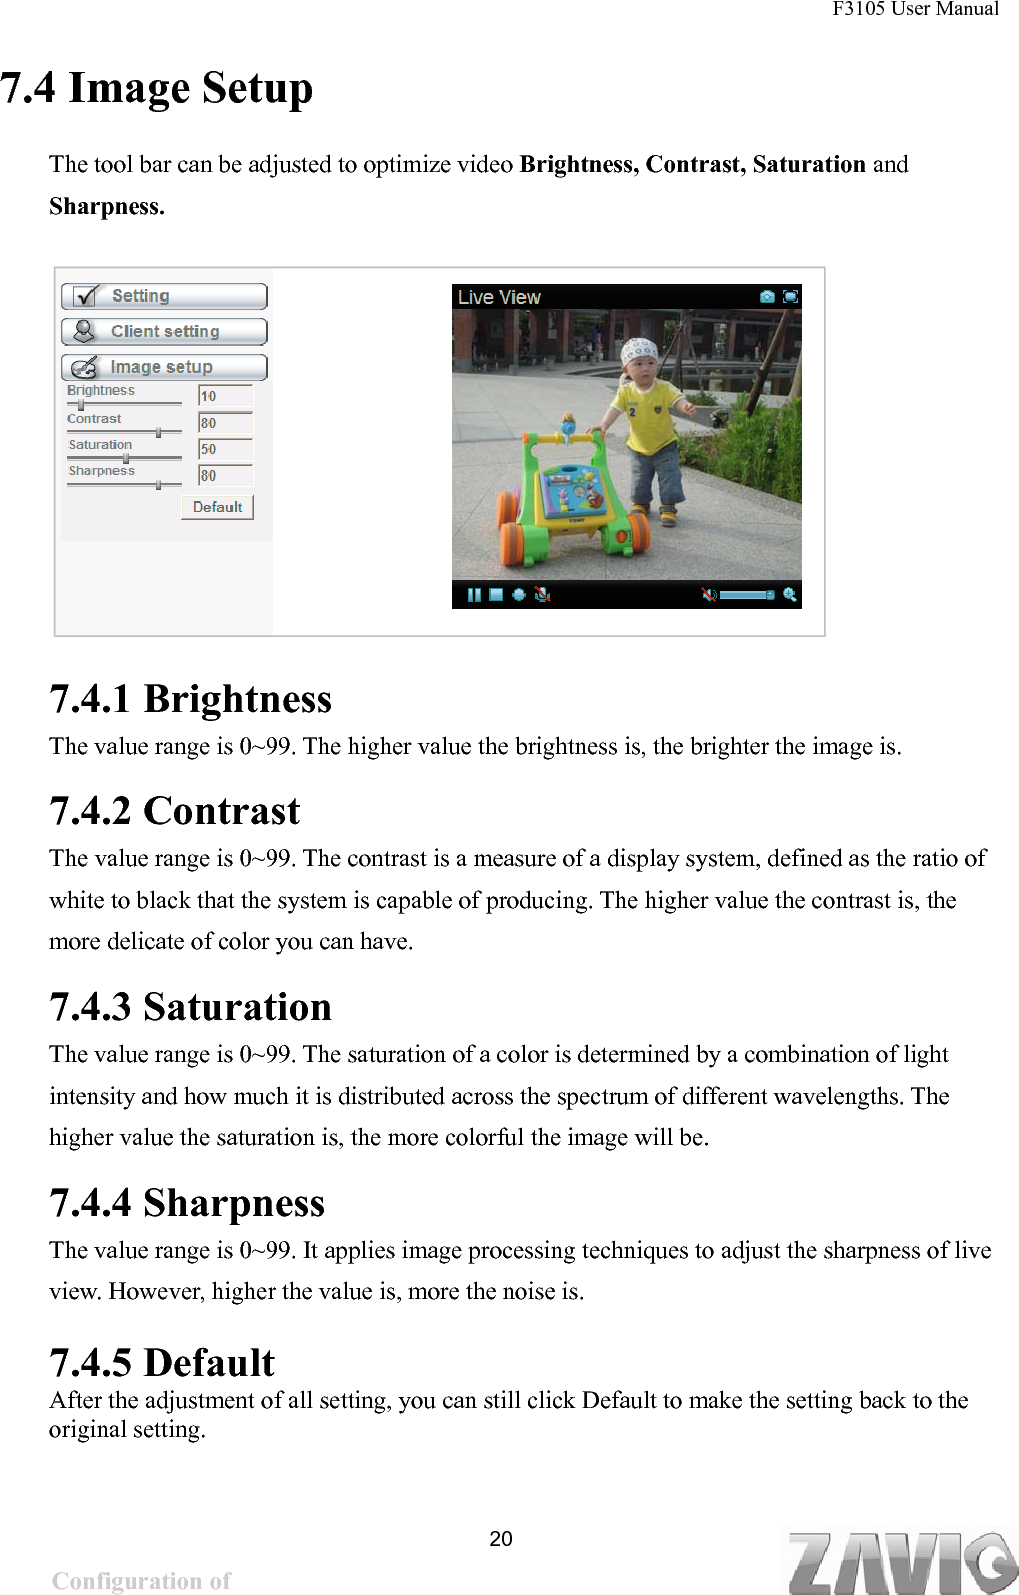 F3105 User Manual   7.4 Image Setup The tool bar can be adjusted to optimize video Brightness, Contrast, Saturation and Sharpness.        7.4.1 Brightness The value range is 0~99. The higher value the brightness is, the brighter the image is.   7.4.2 Contrast The value range is 0~99. The contrast is a measure of a display system, defined as the ratio of white to black that the system is capable of producing. The higher value the contrast is, the more delicate of color you can have.   7.4.3 Saturation The value range is 0~99. The saturation of a color is determined by a combination of light intensity and how much it is distributed across the spectrum of different wavelengths. The higher value the saturation is, the more colorful the image will be.  7.4.4 Sharpness The value range is 0~99. It applies image processing techniques to adjust the sharpness of live view. However, higher the value is, more the noise is.   7.4.5 Default  After the adjustment of all setting, you can still click Default to make the setting back to the original setting.  20Configuration of Main Menu 